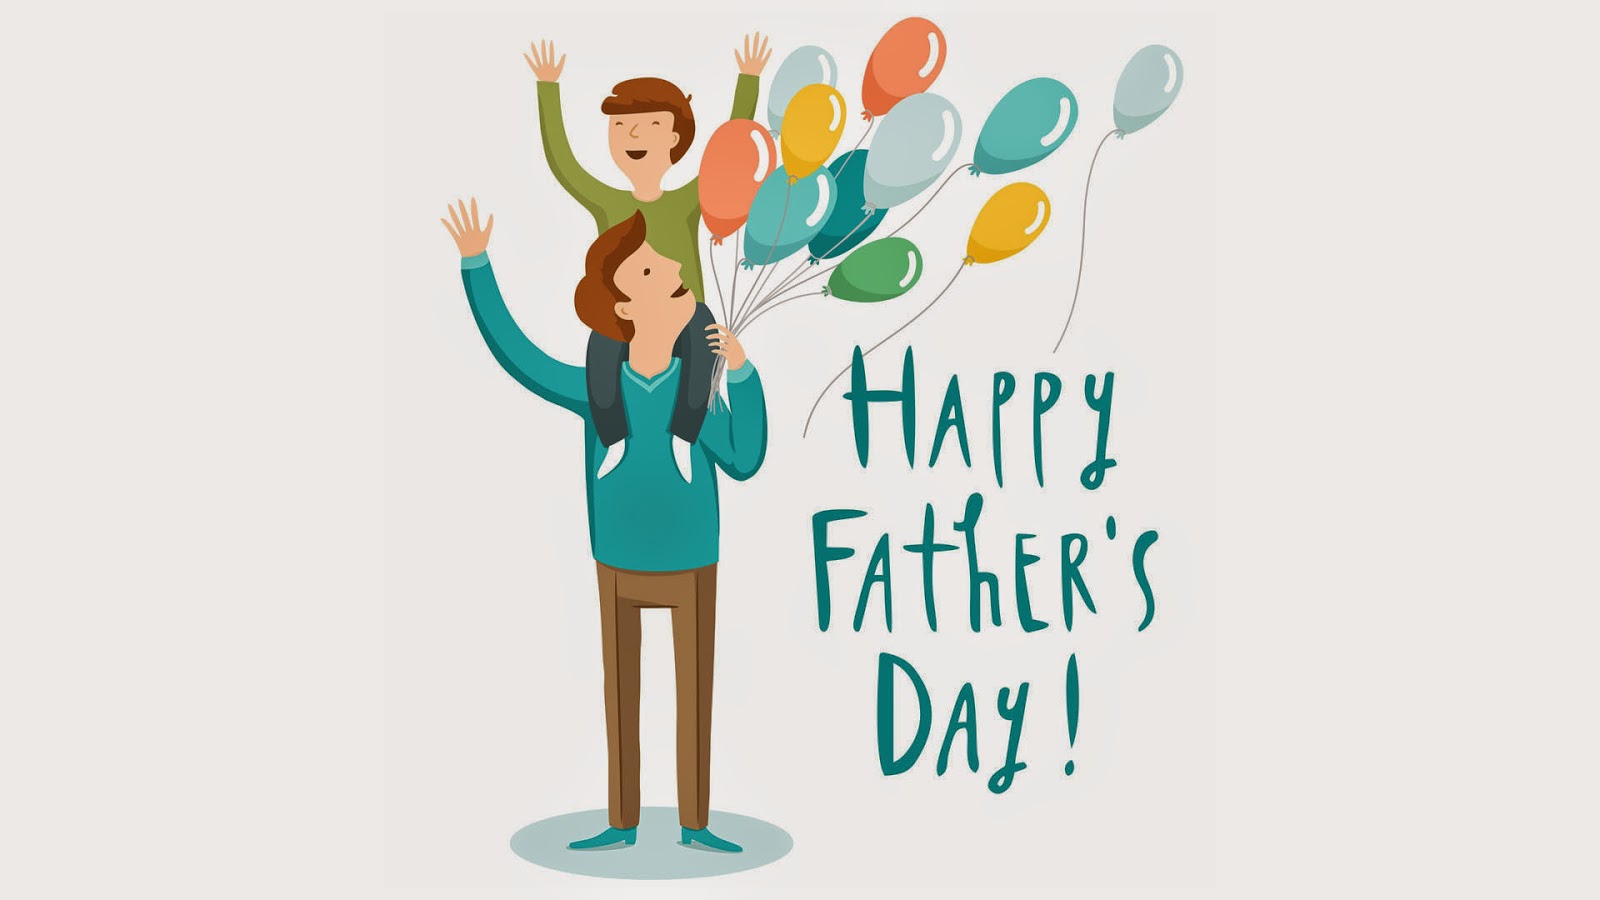 14+] Father's Day 2019 Wallpapers - WallpaperSafari